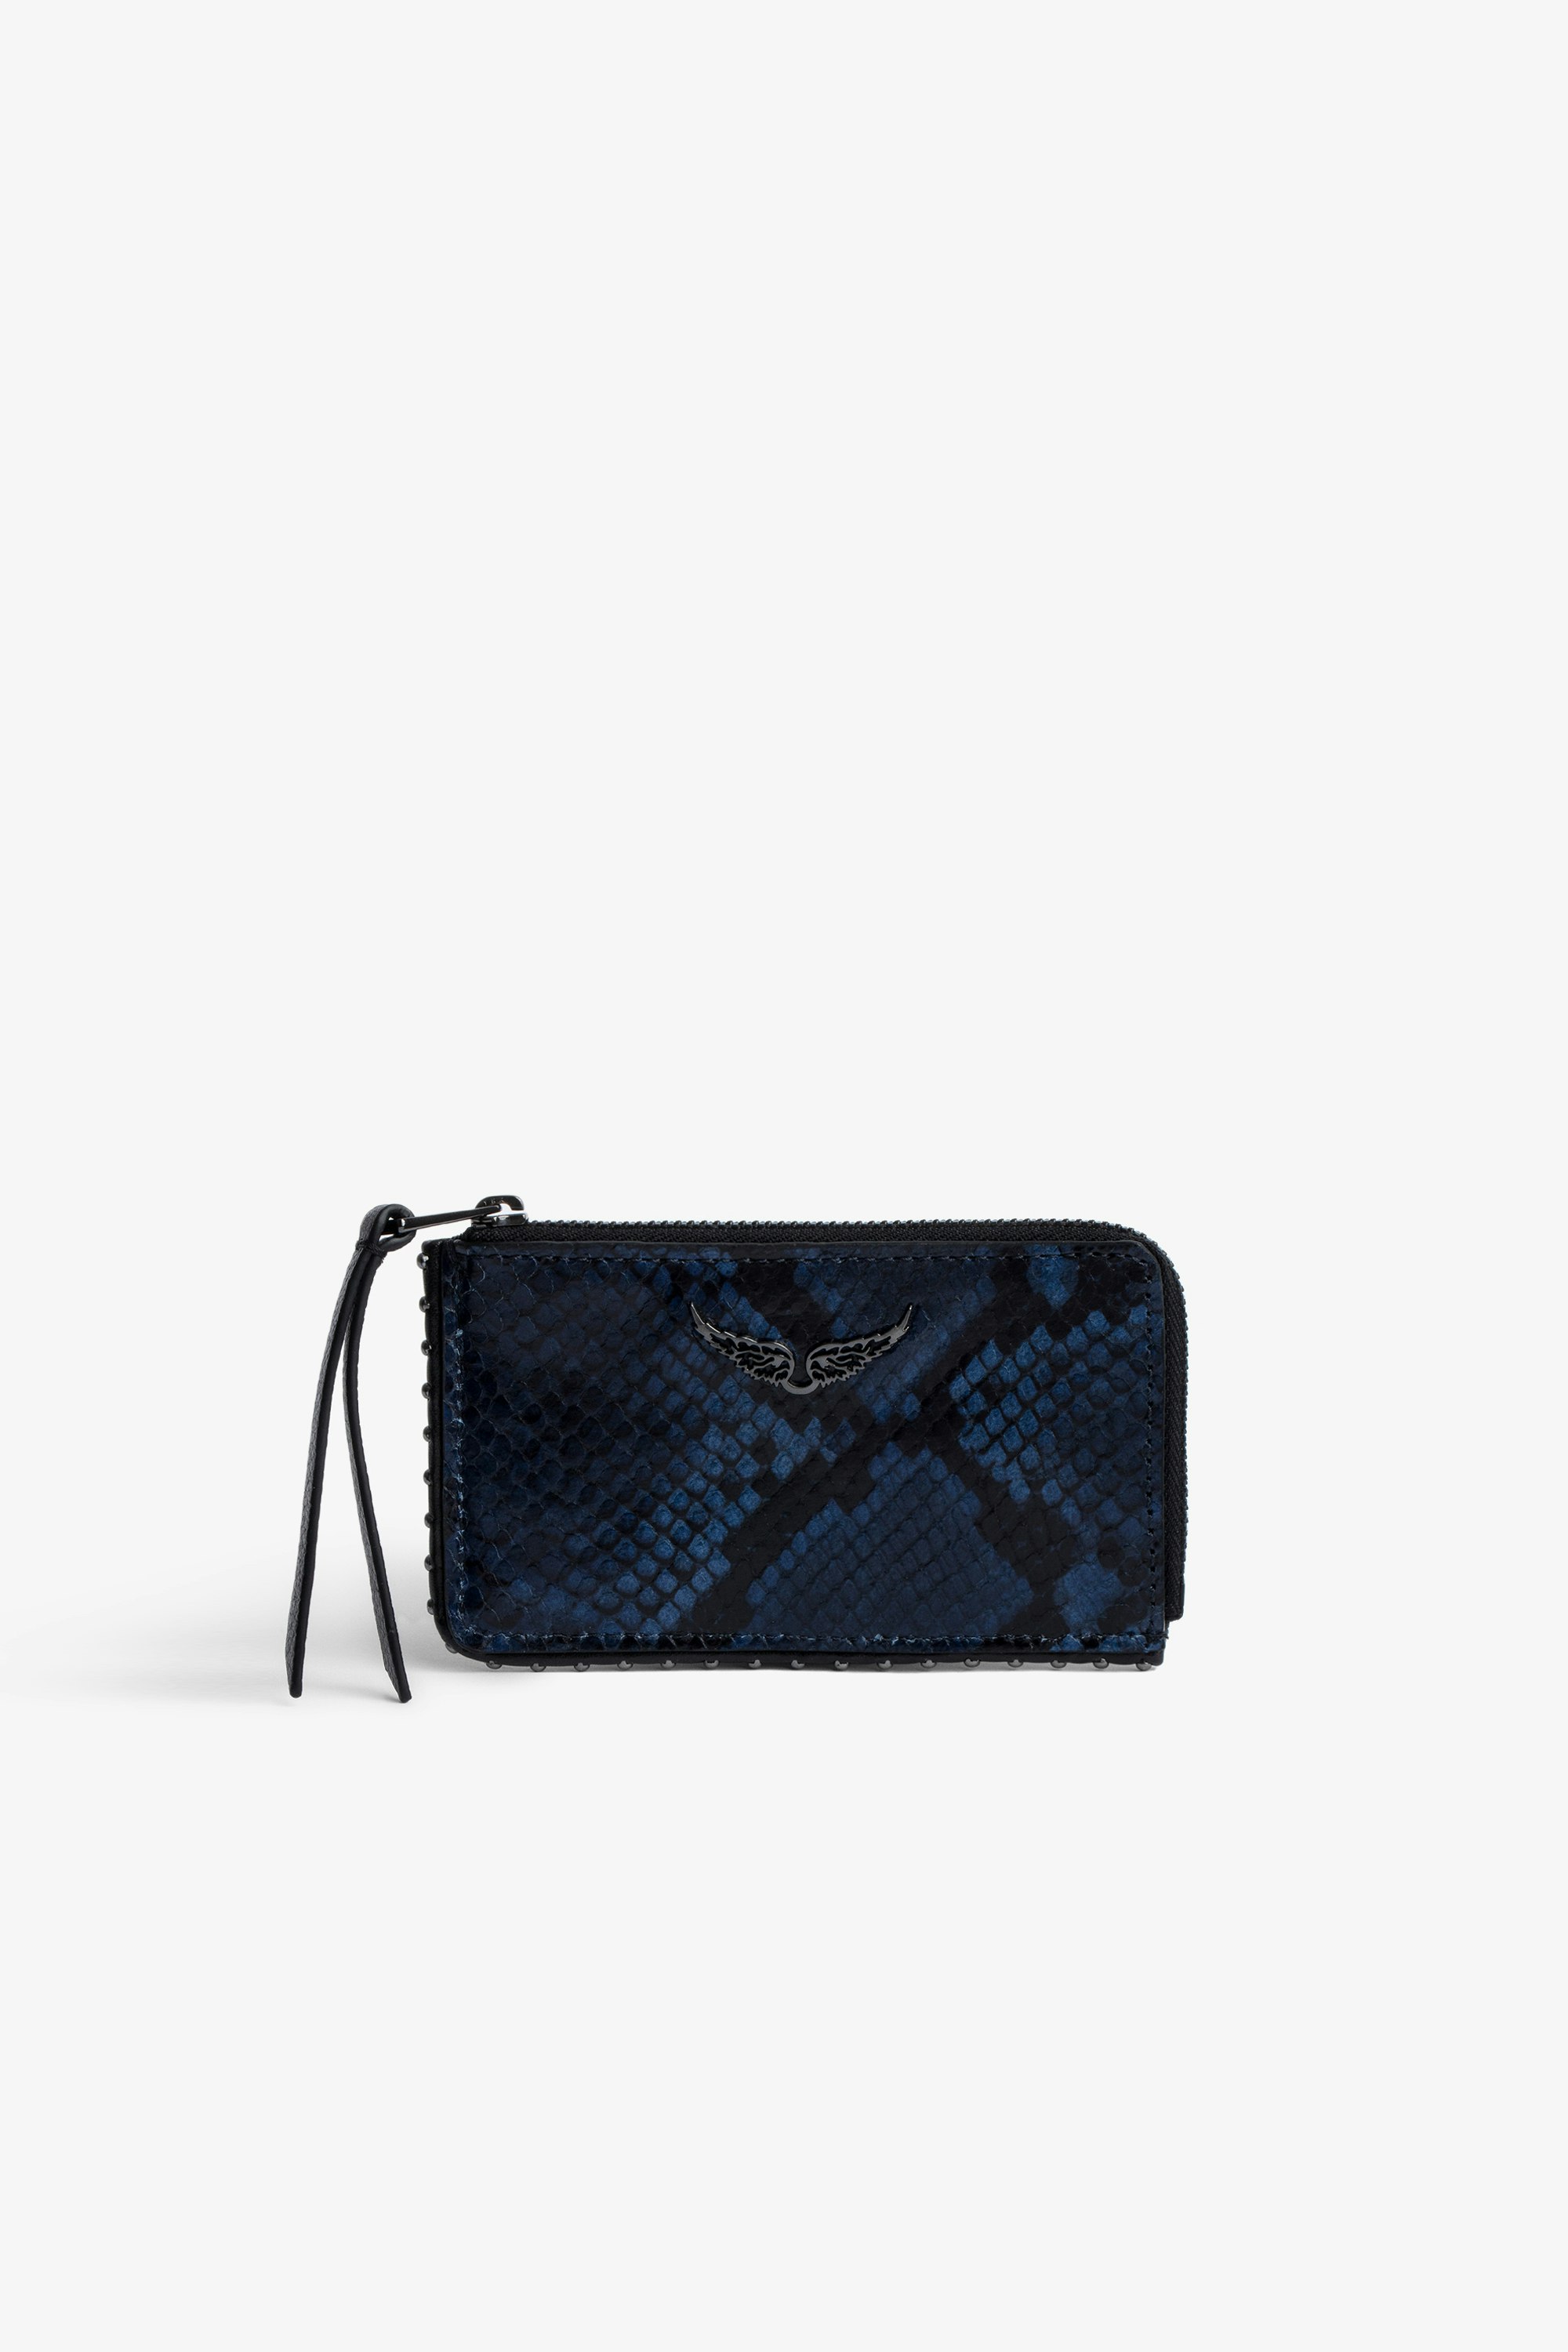 ZV Card Savage Card Case Women’s card holder in black and blue python-effect leather